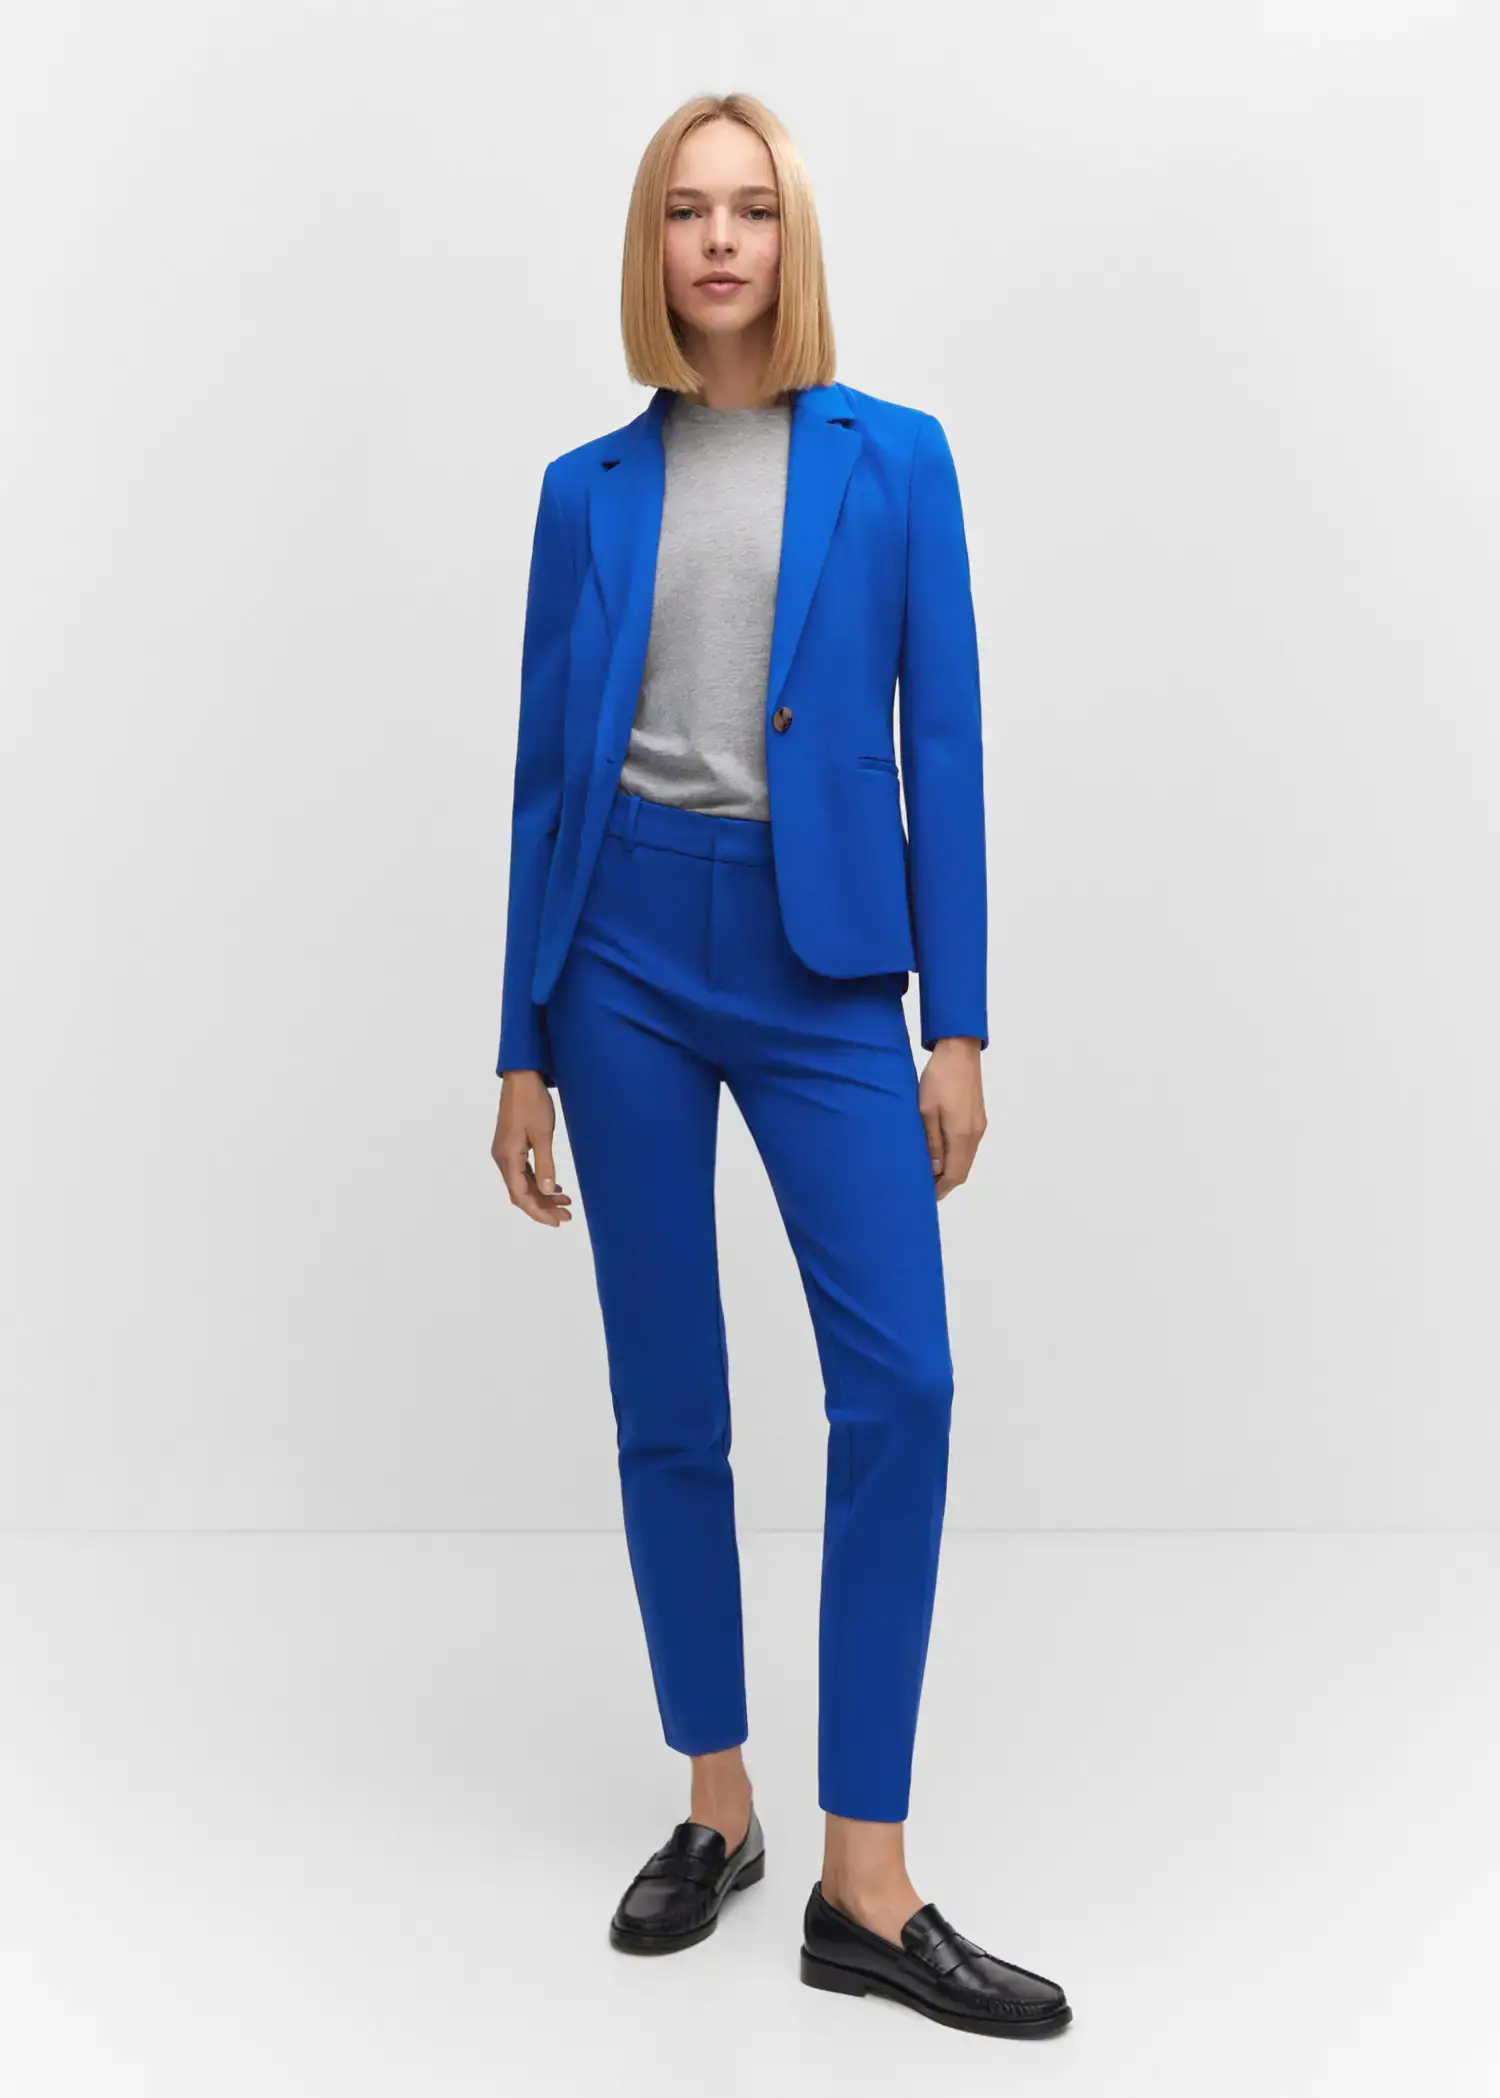 Mango Fitted blazer with blunt stitching. a woman wearing a blue suit standing in a room. 